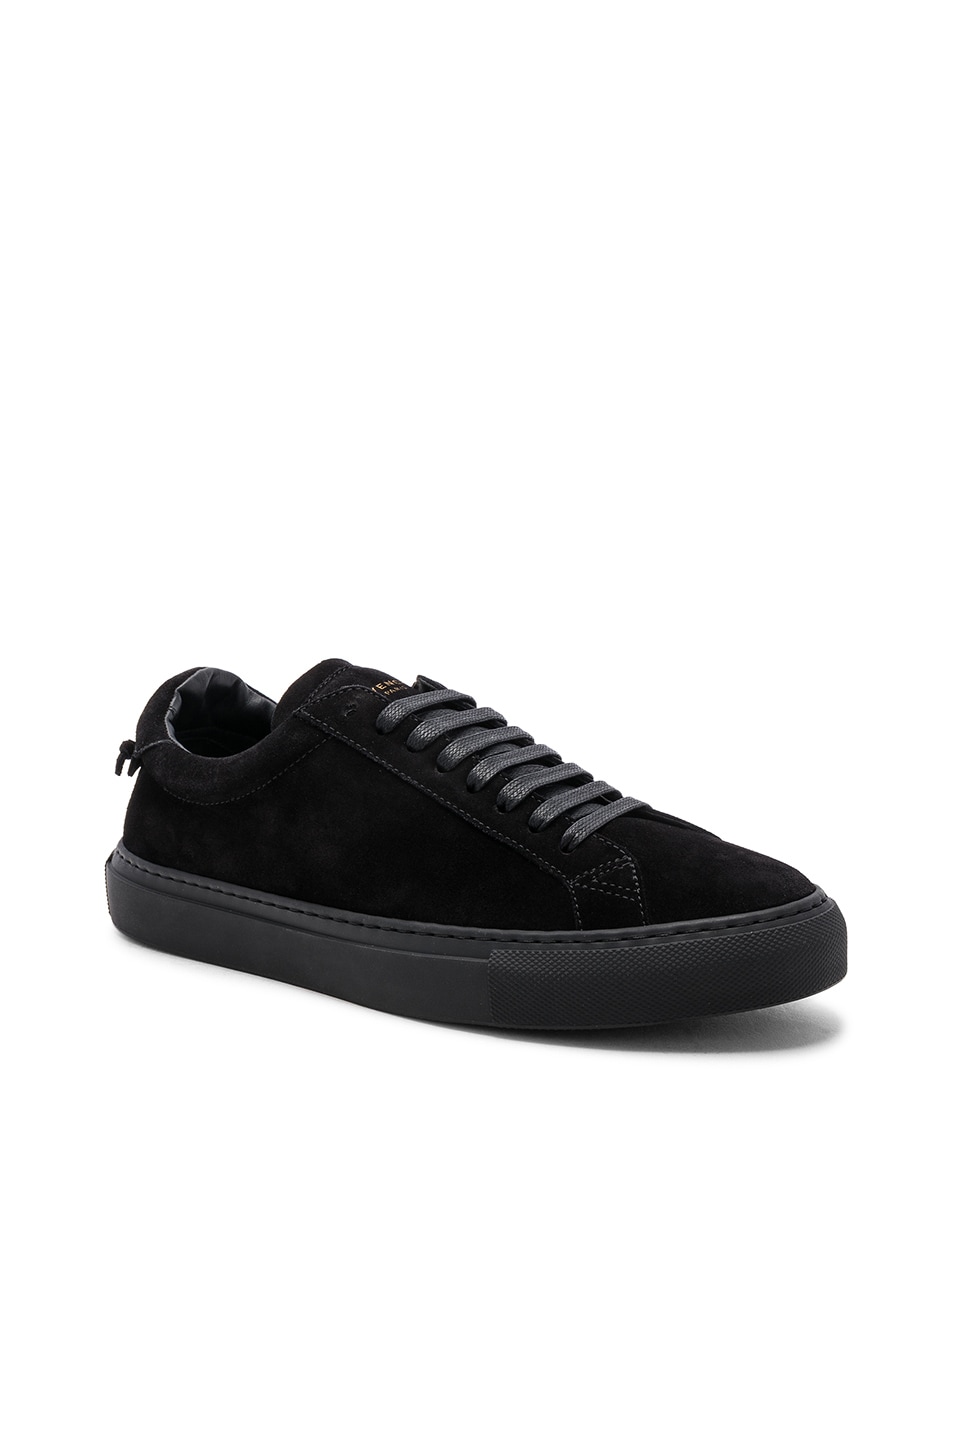 Image 1 of Givenchy Tonal Suede Urban Tie Knot Sneakers in Black